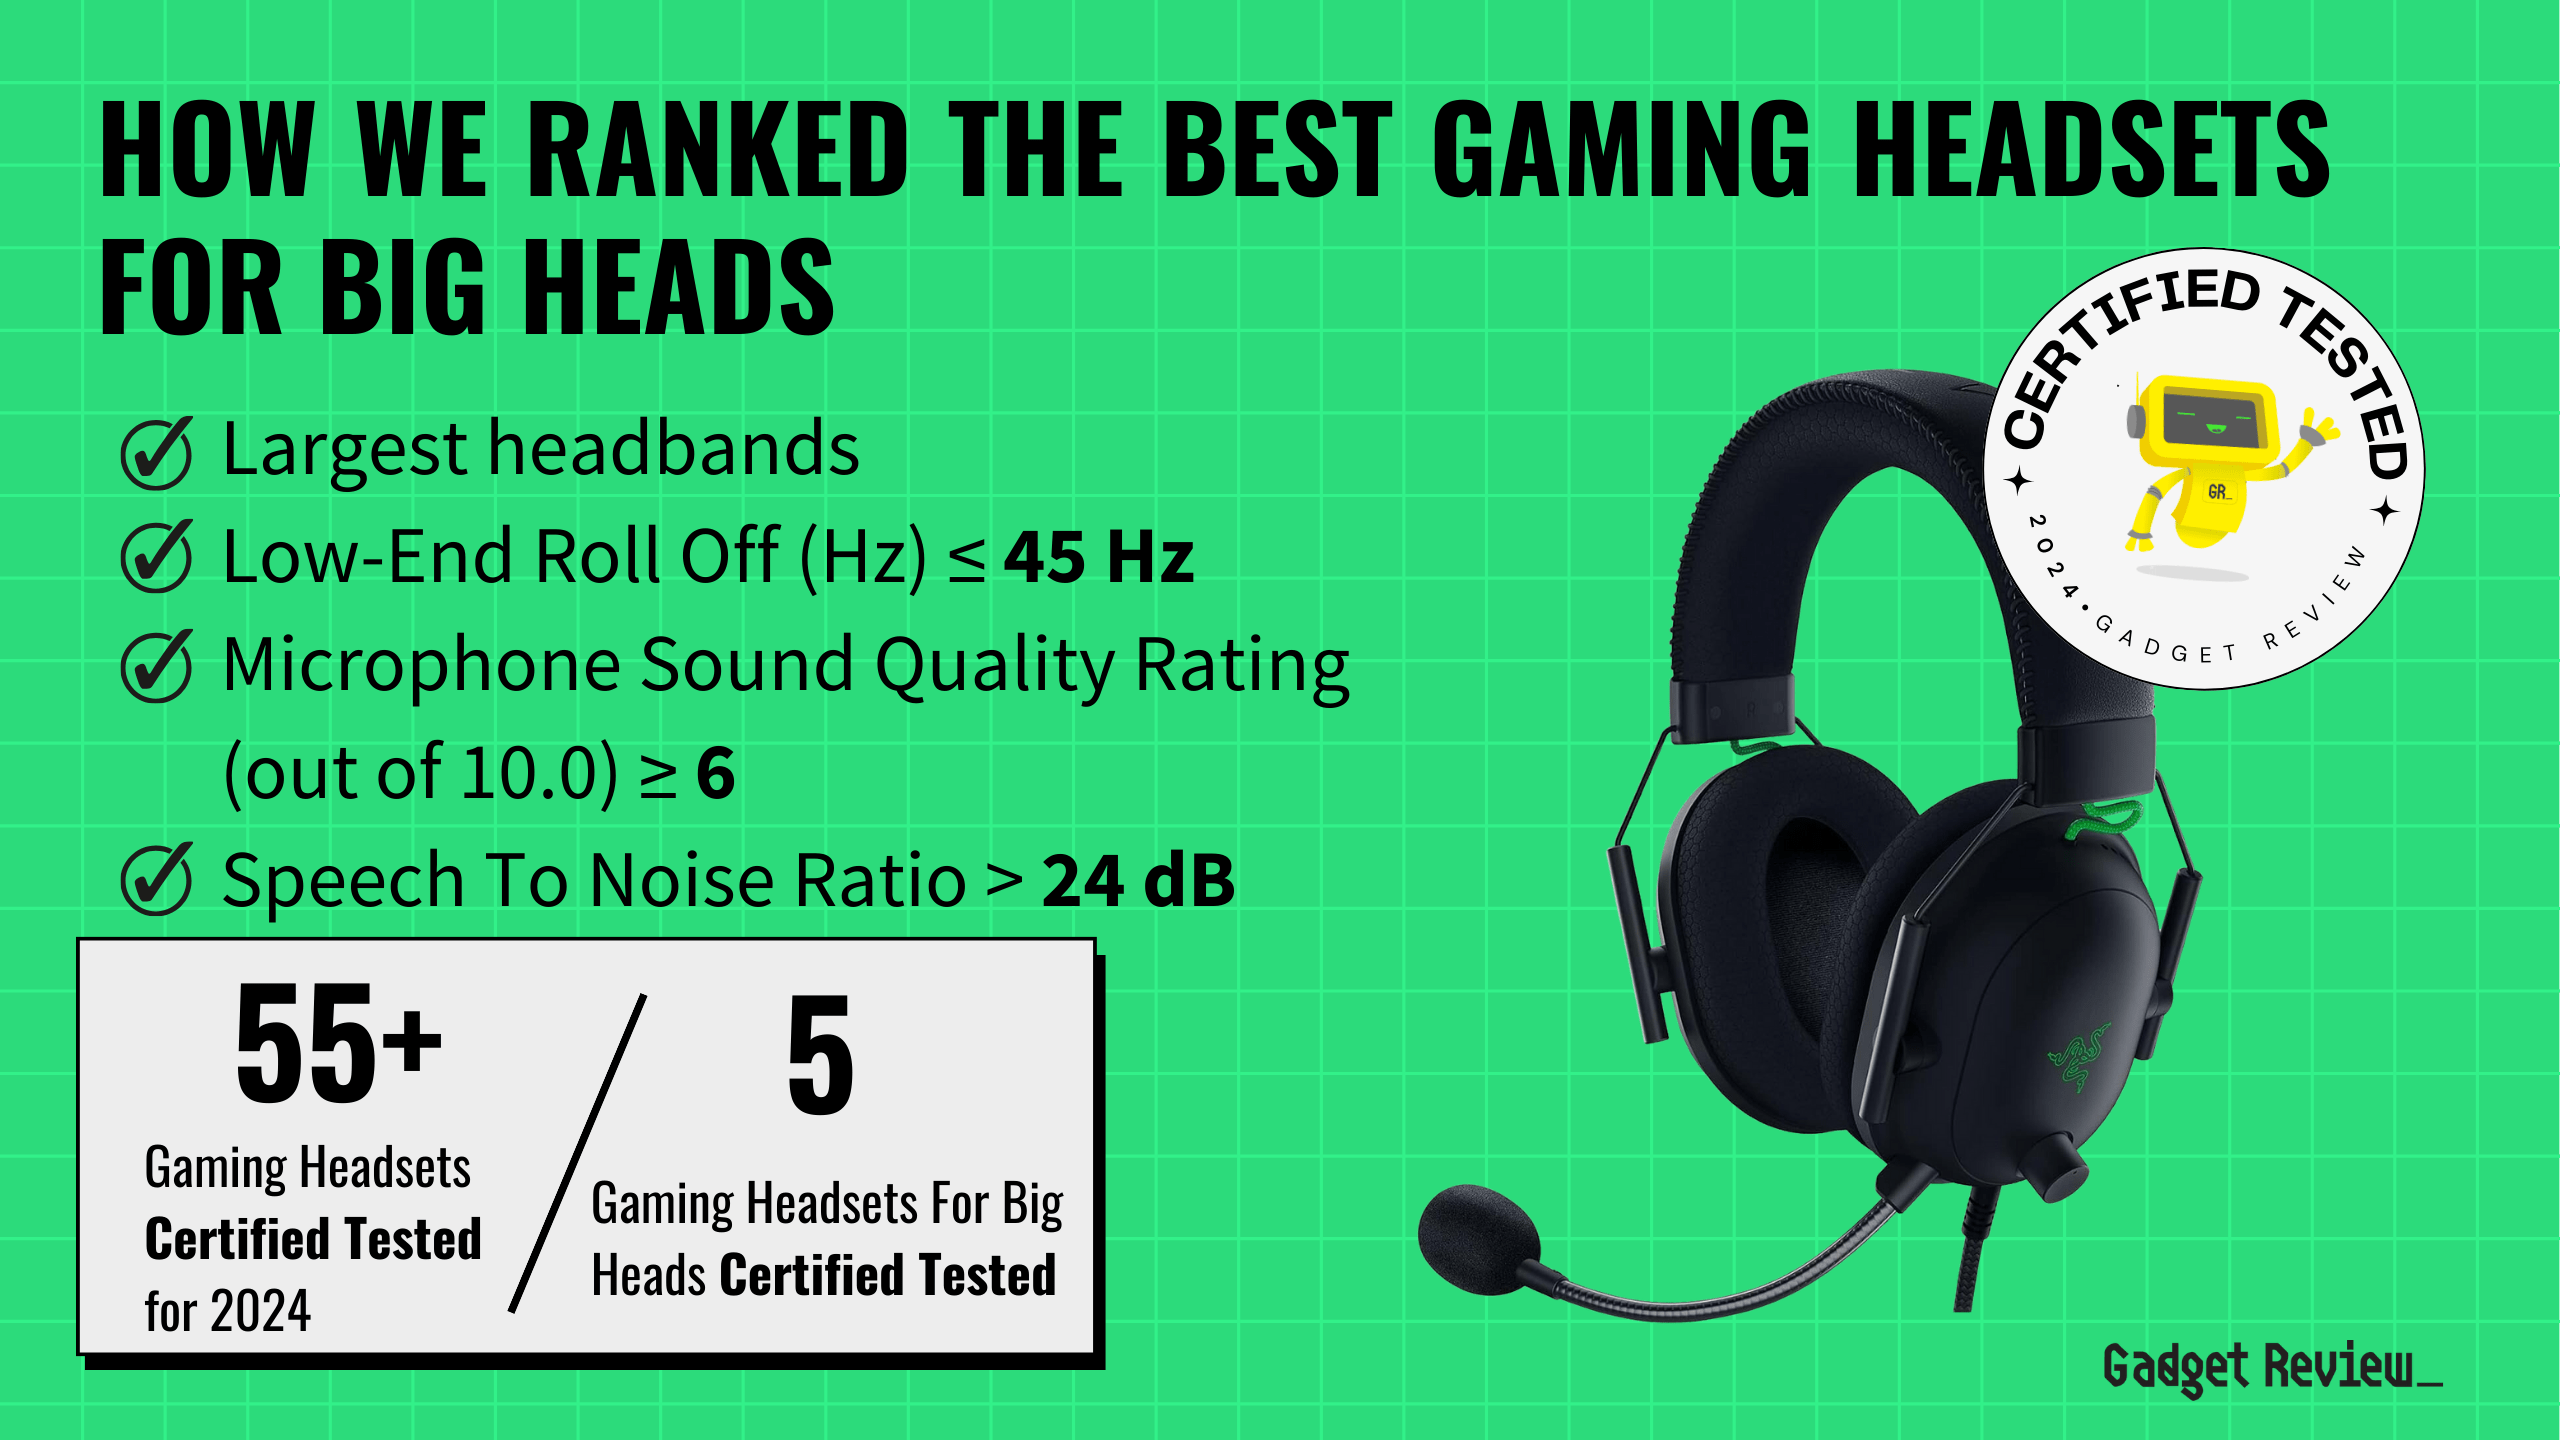 best gaming headset for big heads guide that shows the top best gaming headset model